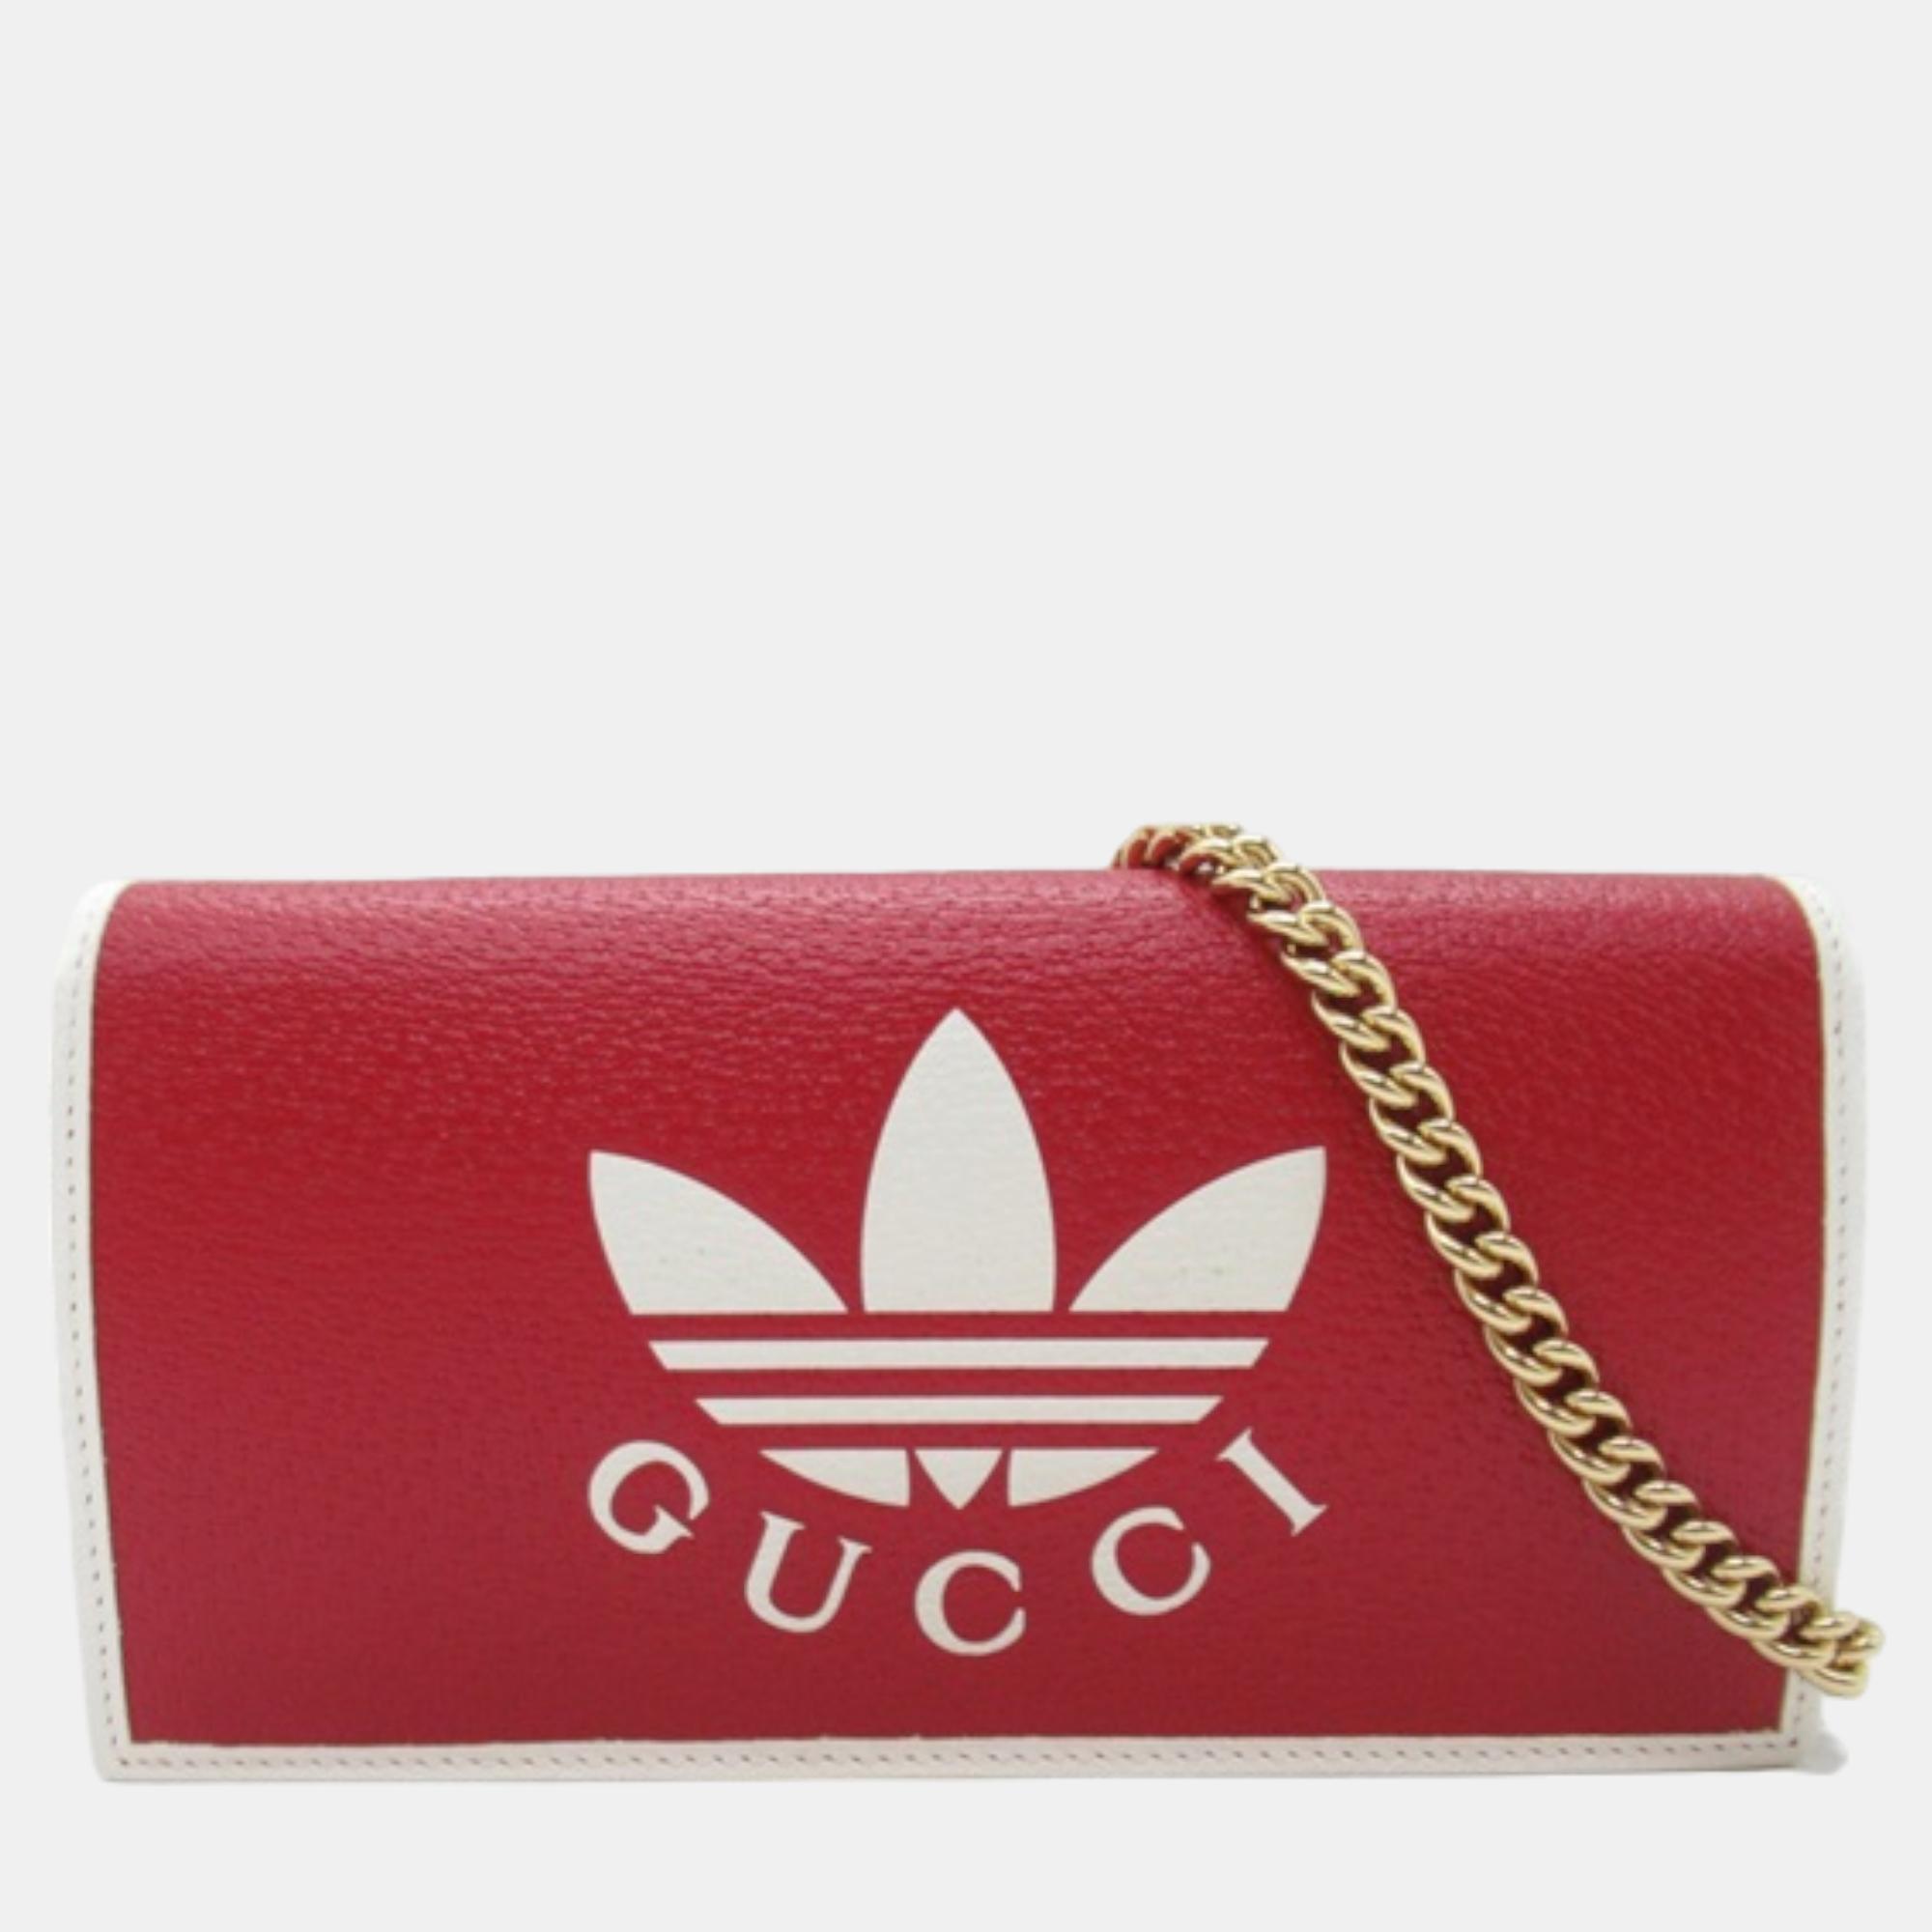 

Gucci x Adidas Red Leather Wallet on Chain